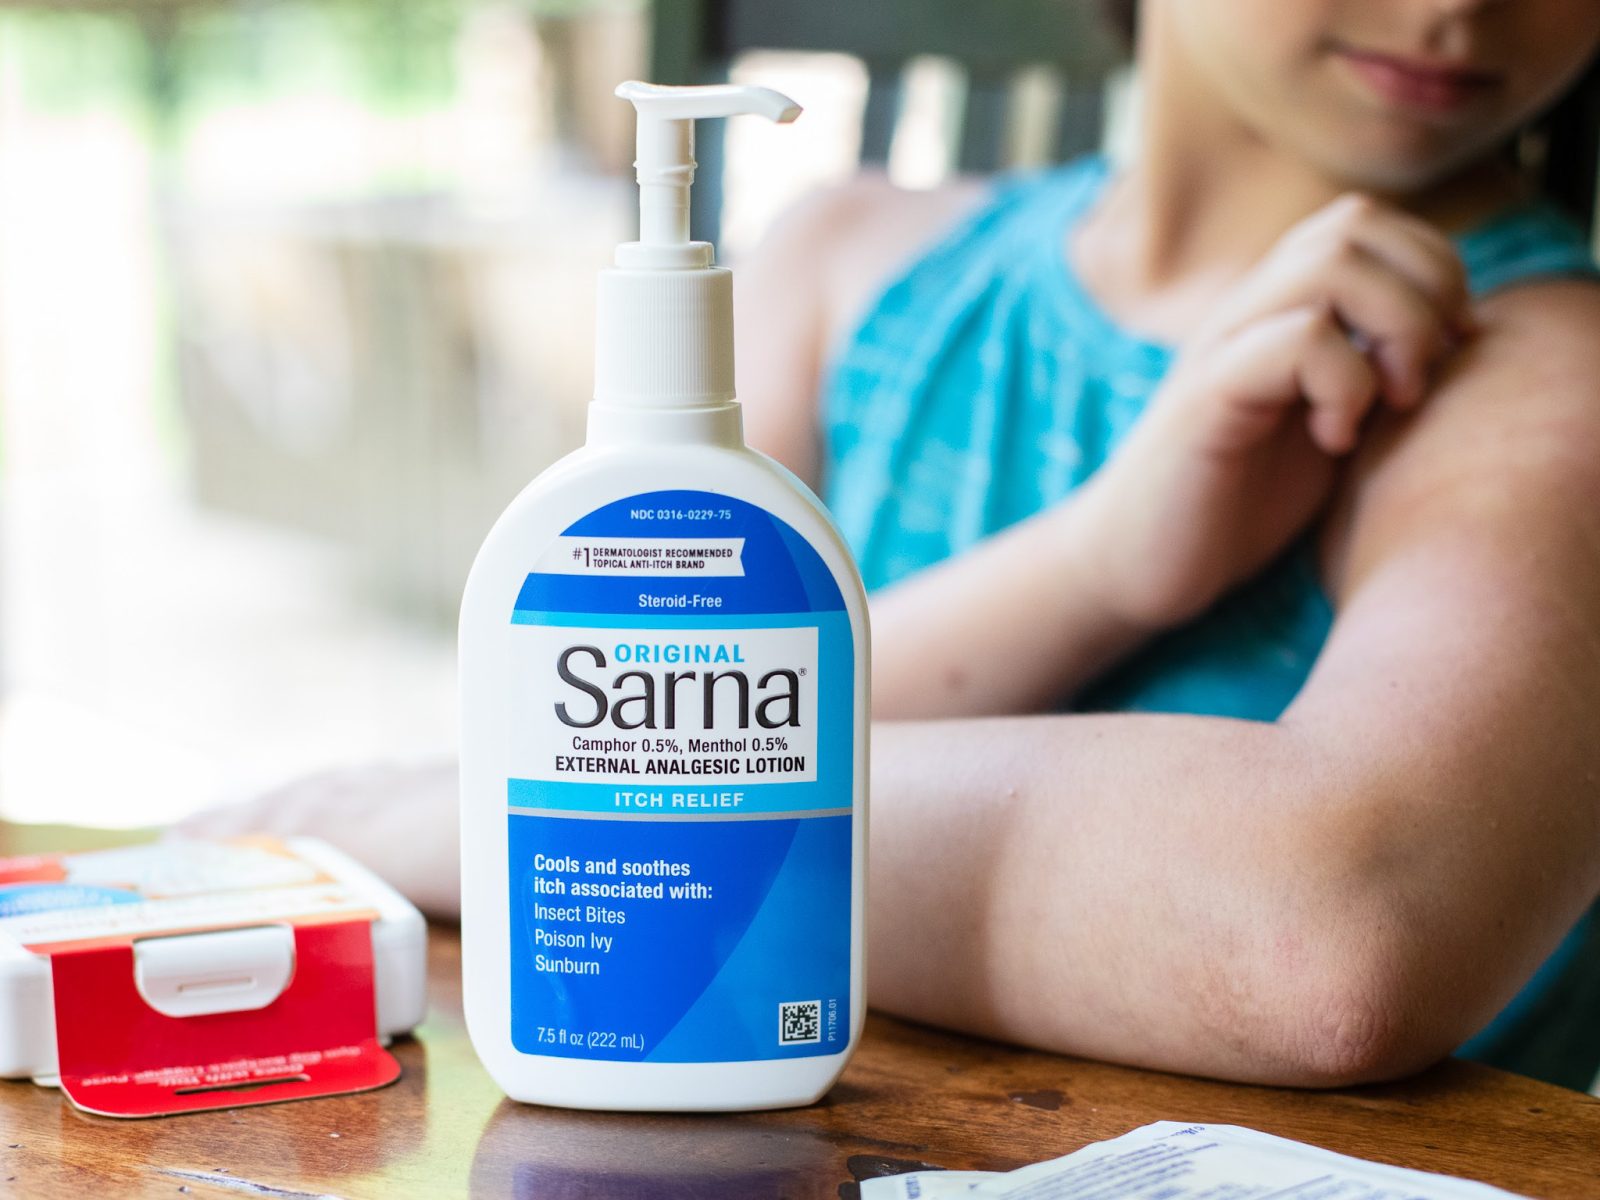 Grab Sarna Itch Relief Lotion For Just $5.77 At Kroger (Regular Price $11.49)